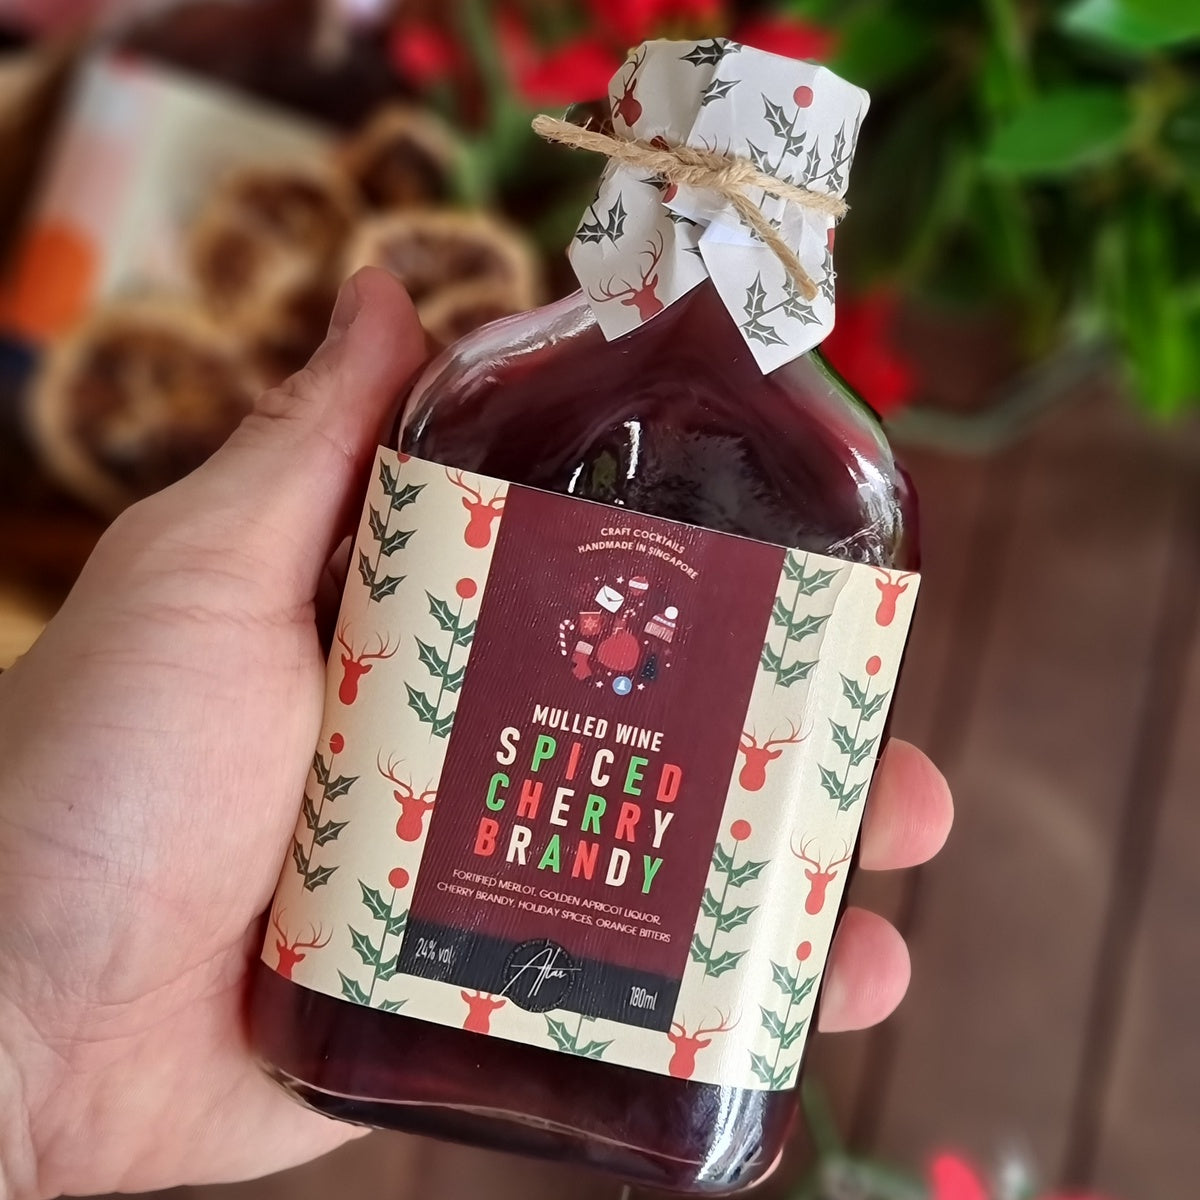 Mulled Wine Spiced Cherry Brandy – Atlas Handcrafted